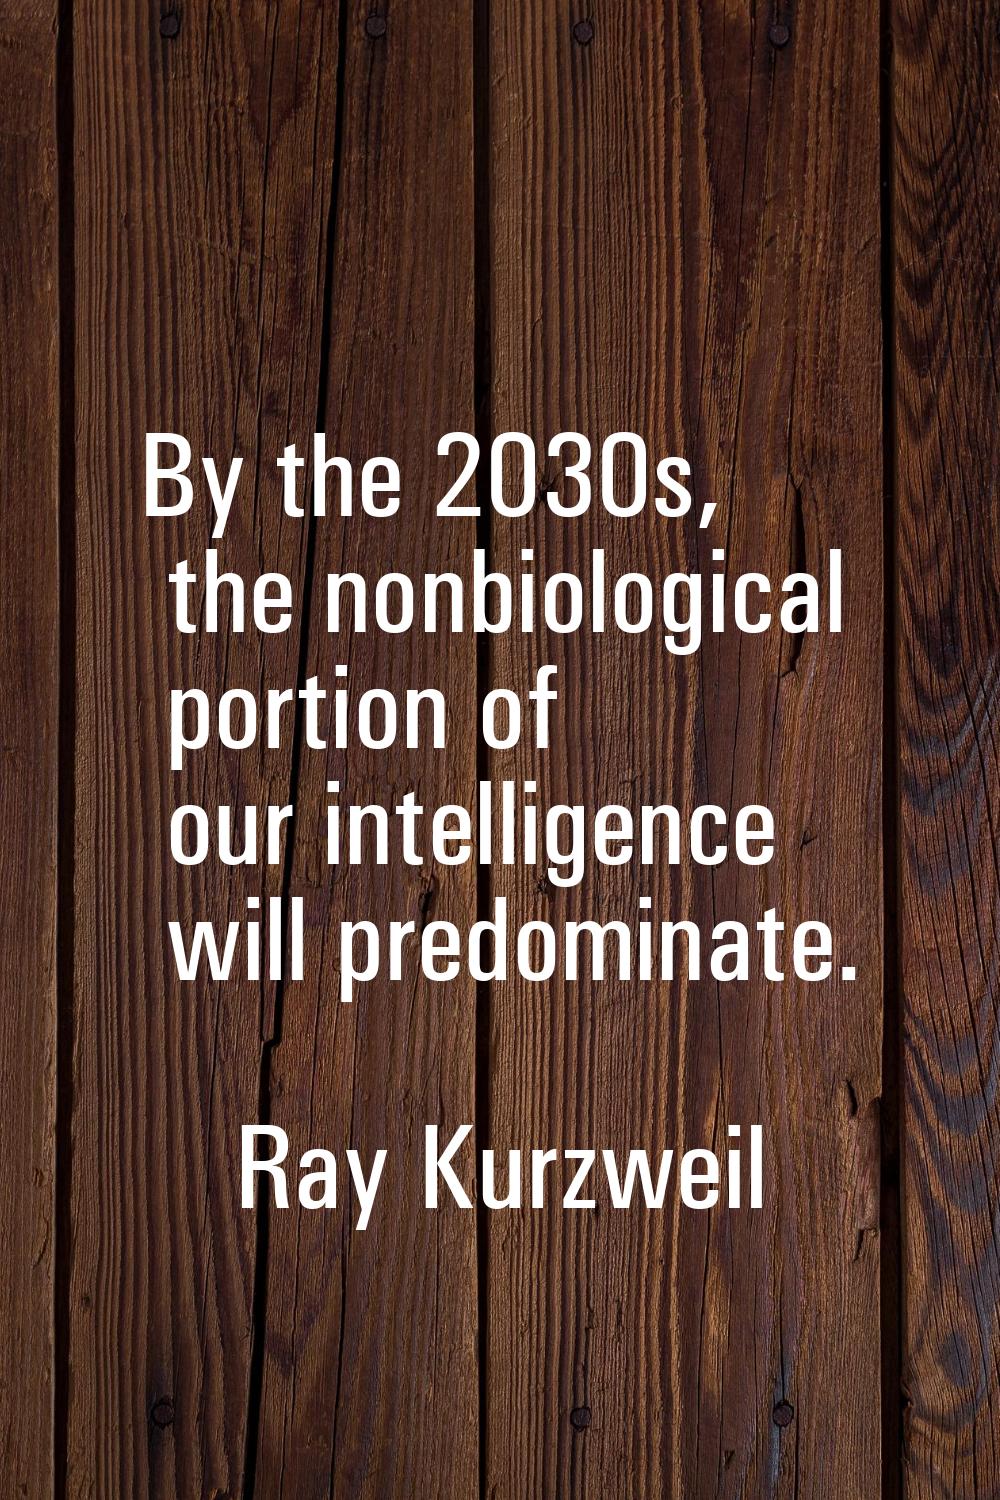 By the 2030s, the nonbiological portion of our intelligence will predominate.